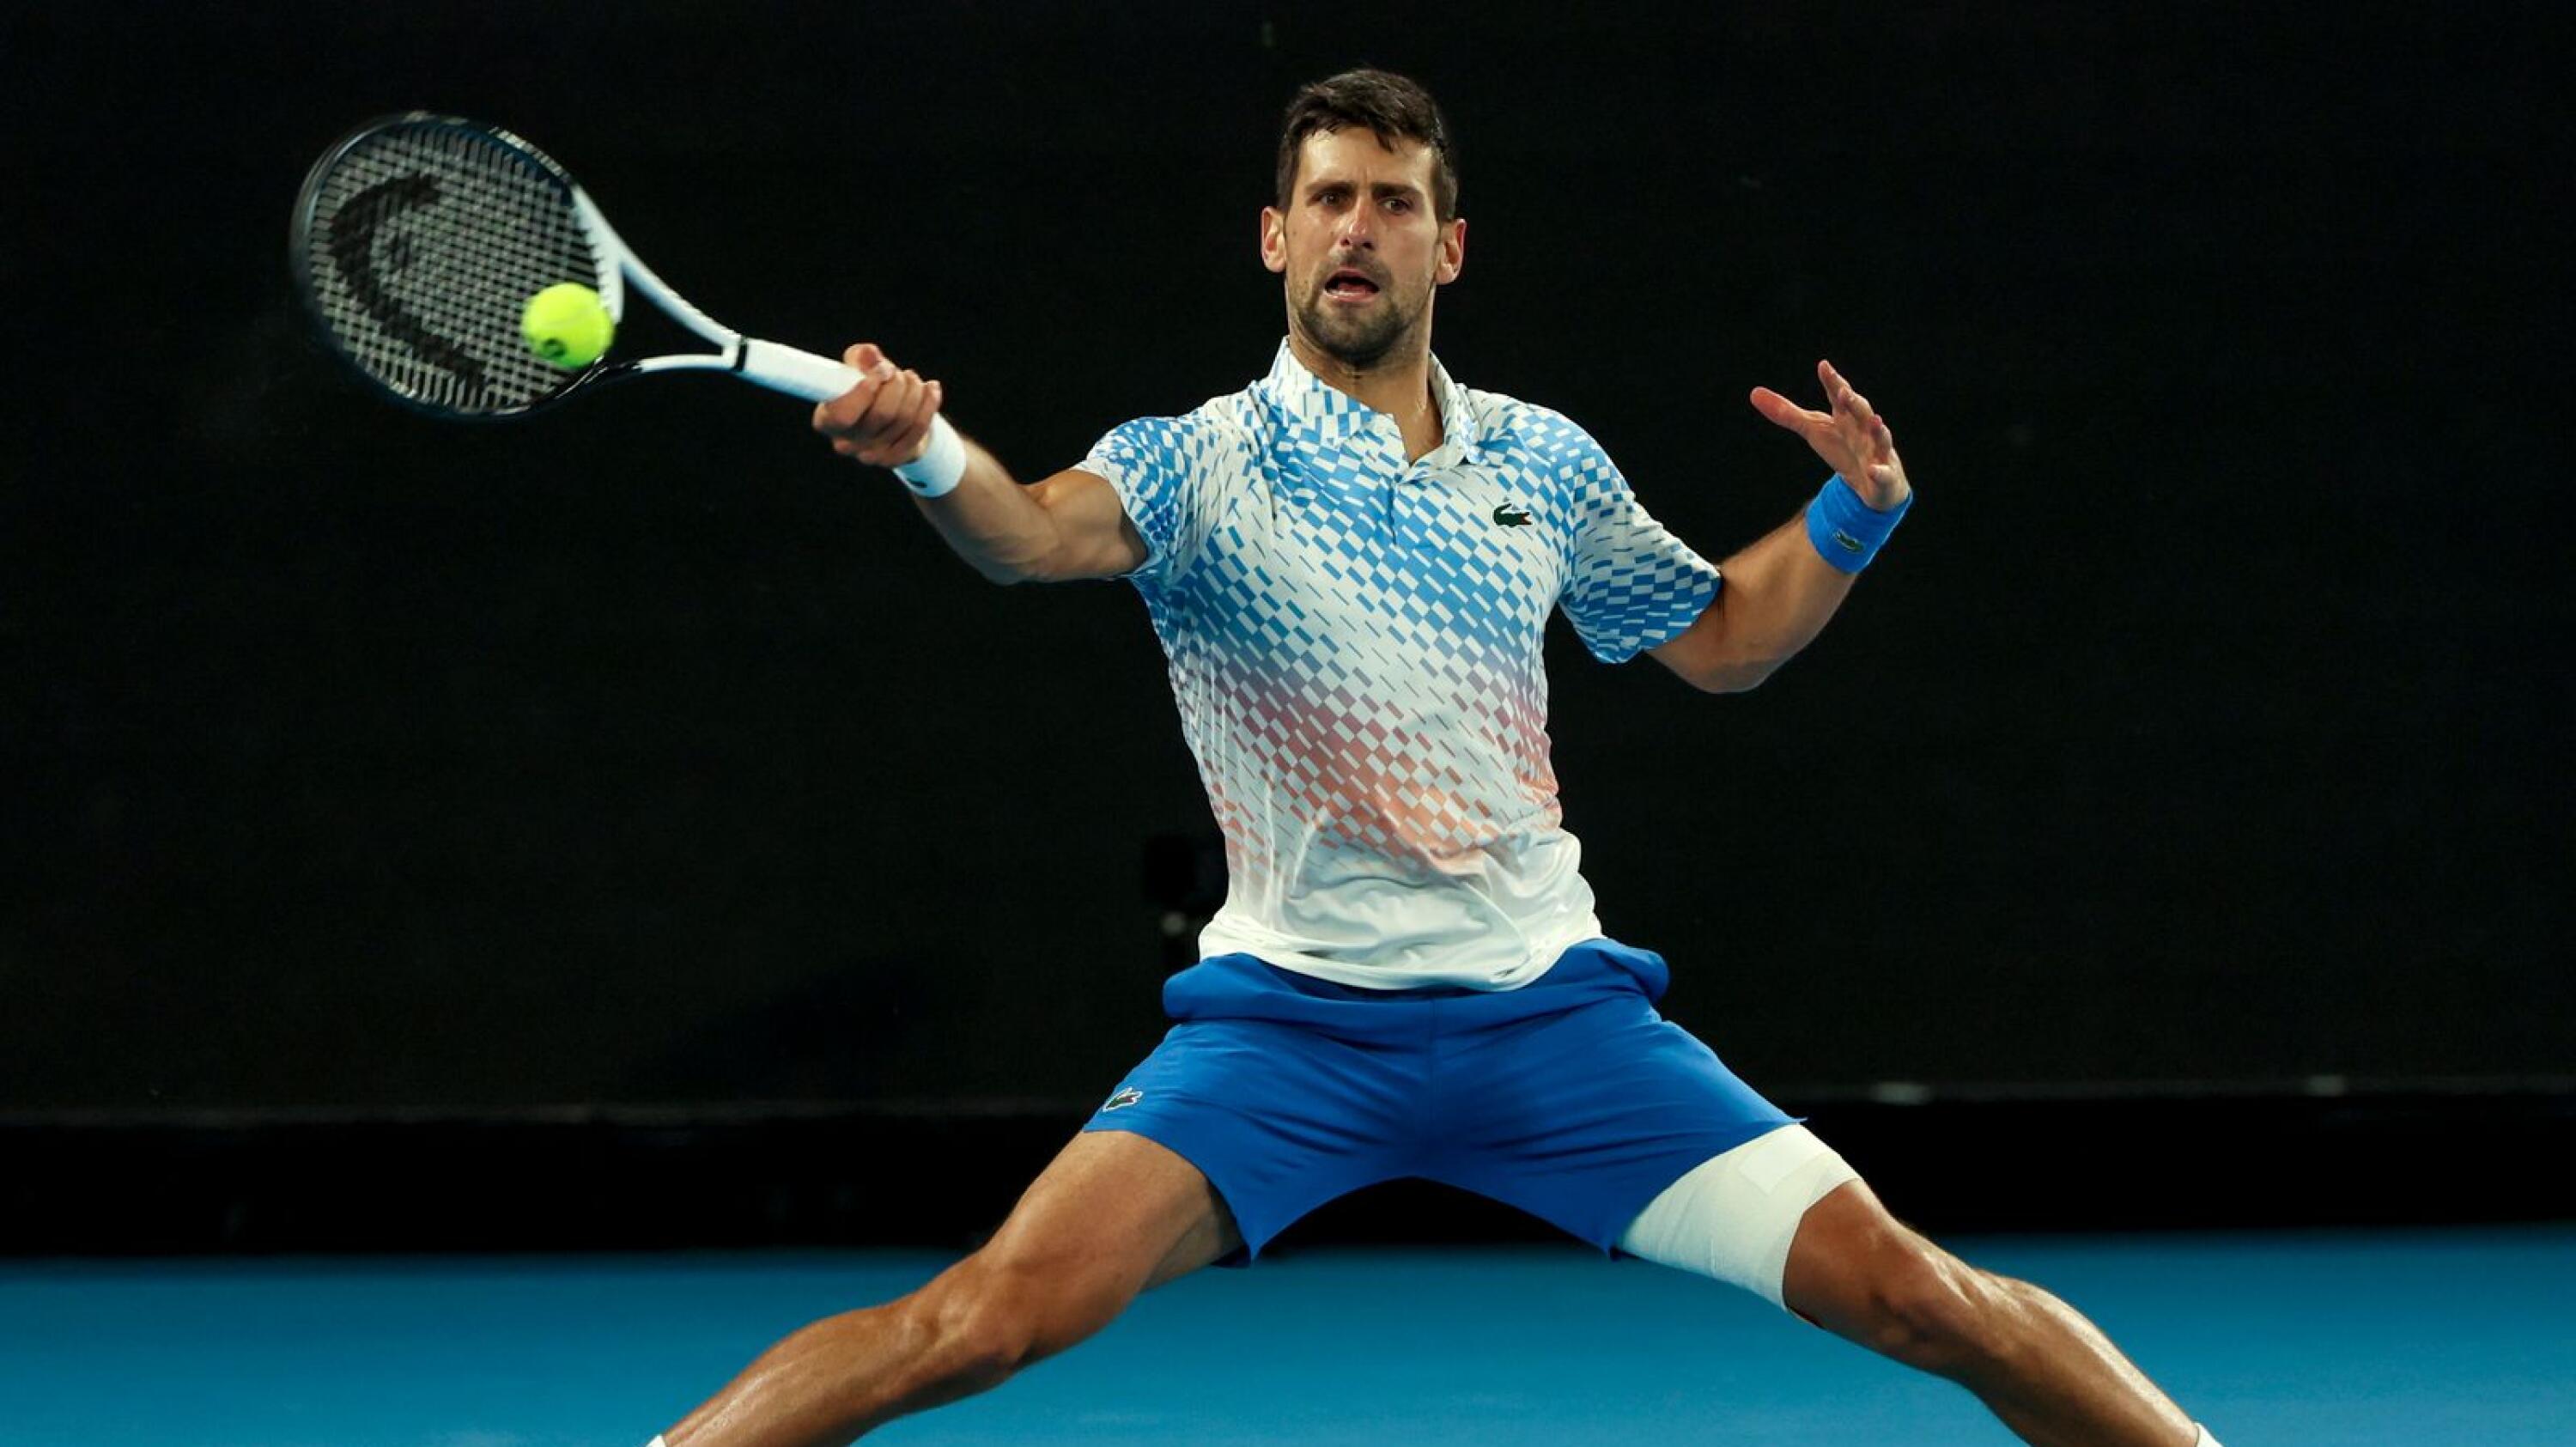 Novak Djokovic of Serbia in action during his quarter- final match against Andrey Rublev of Russia at the Australian Open tennis tournament in Melbourne